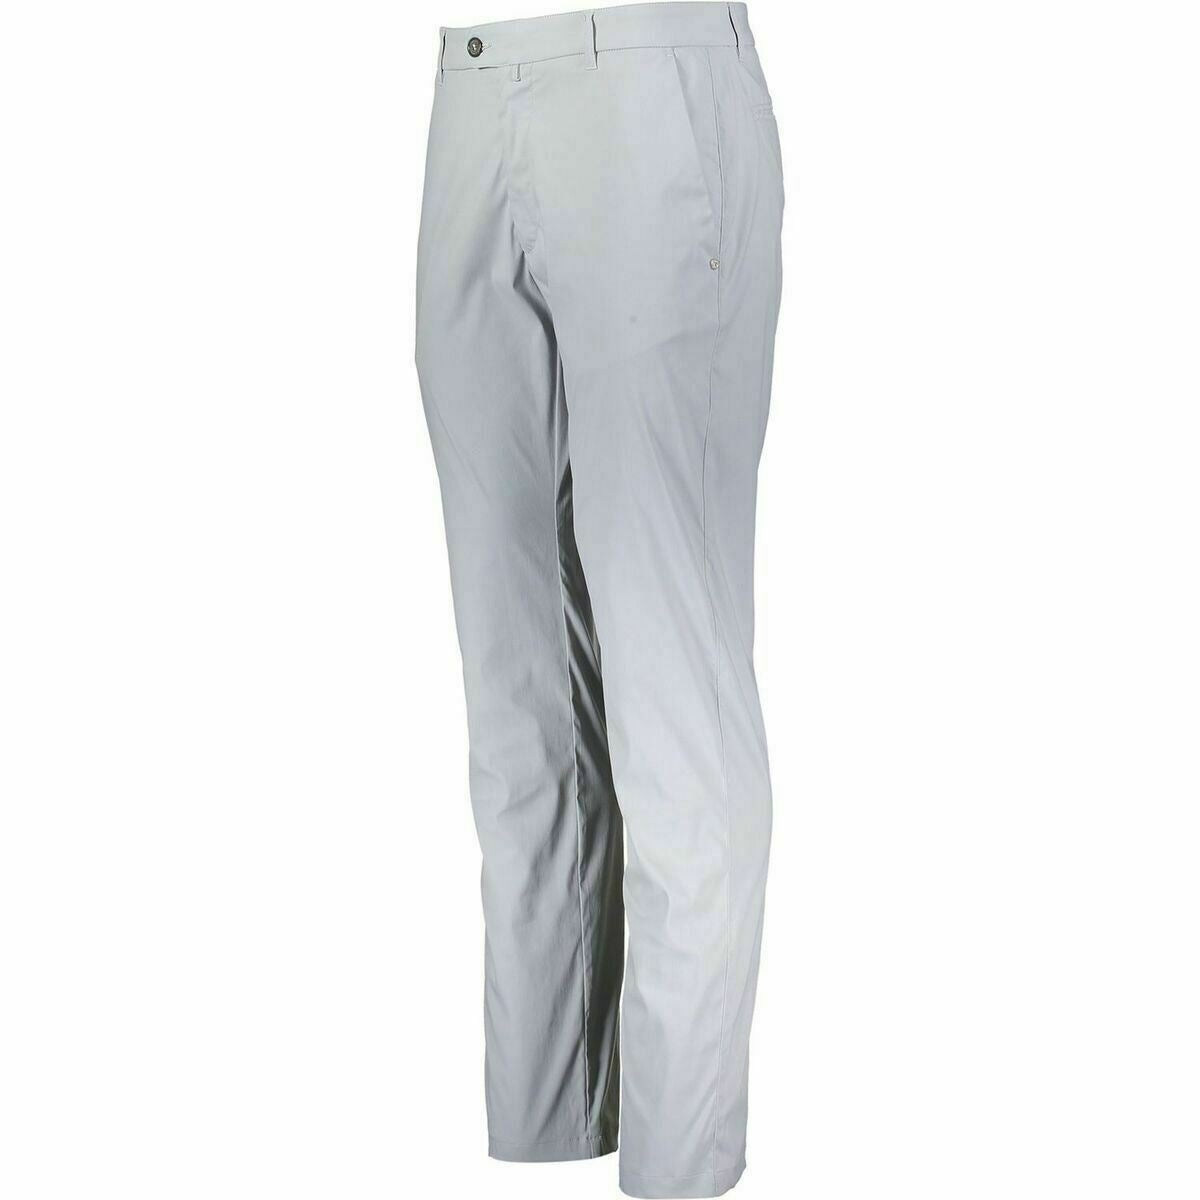 COLMAR Womens Grey Lightweight Casual / Outdoor Trousers size M size L rrp Â£125